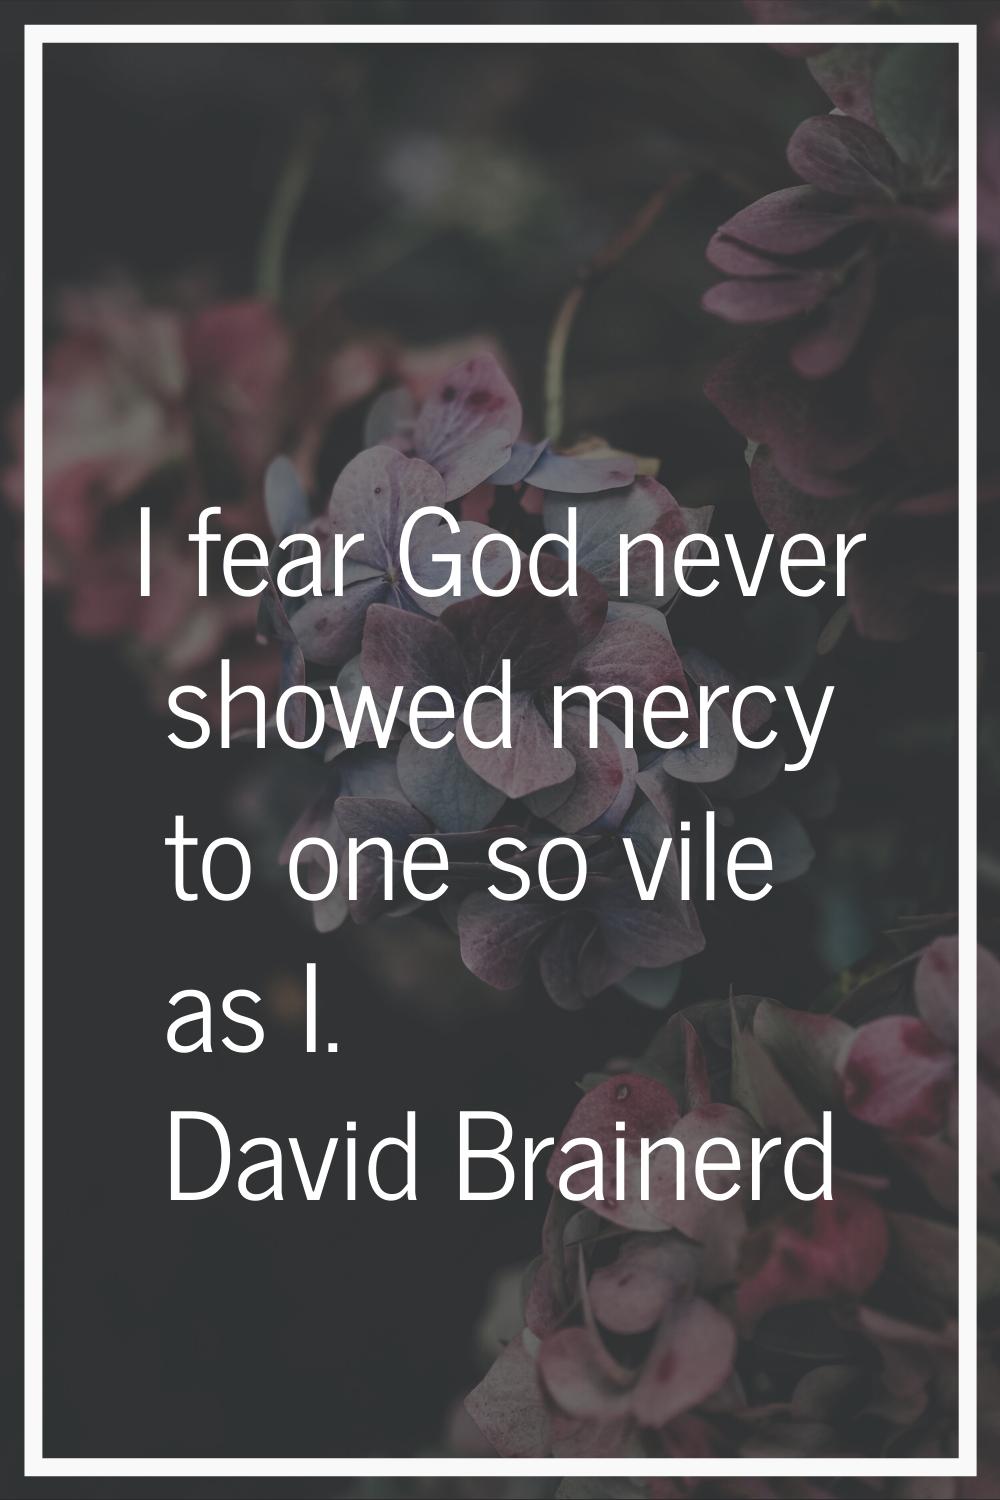 I fear God never showed mercy to one so vile as I.